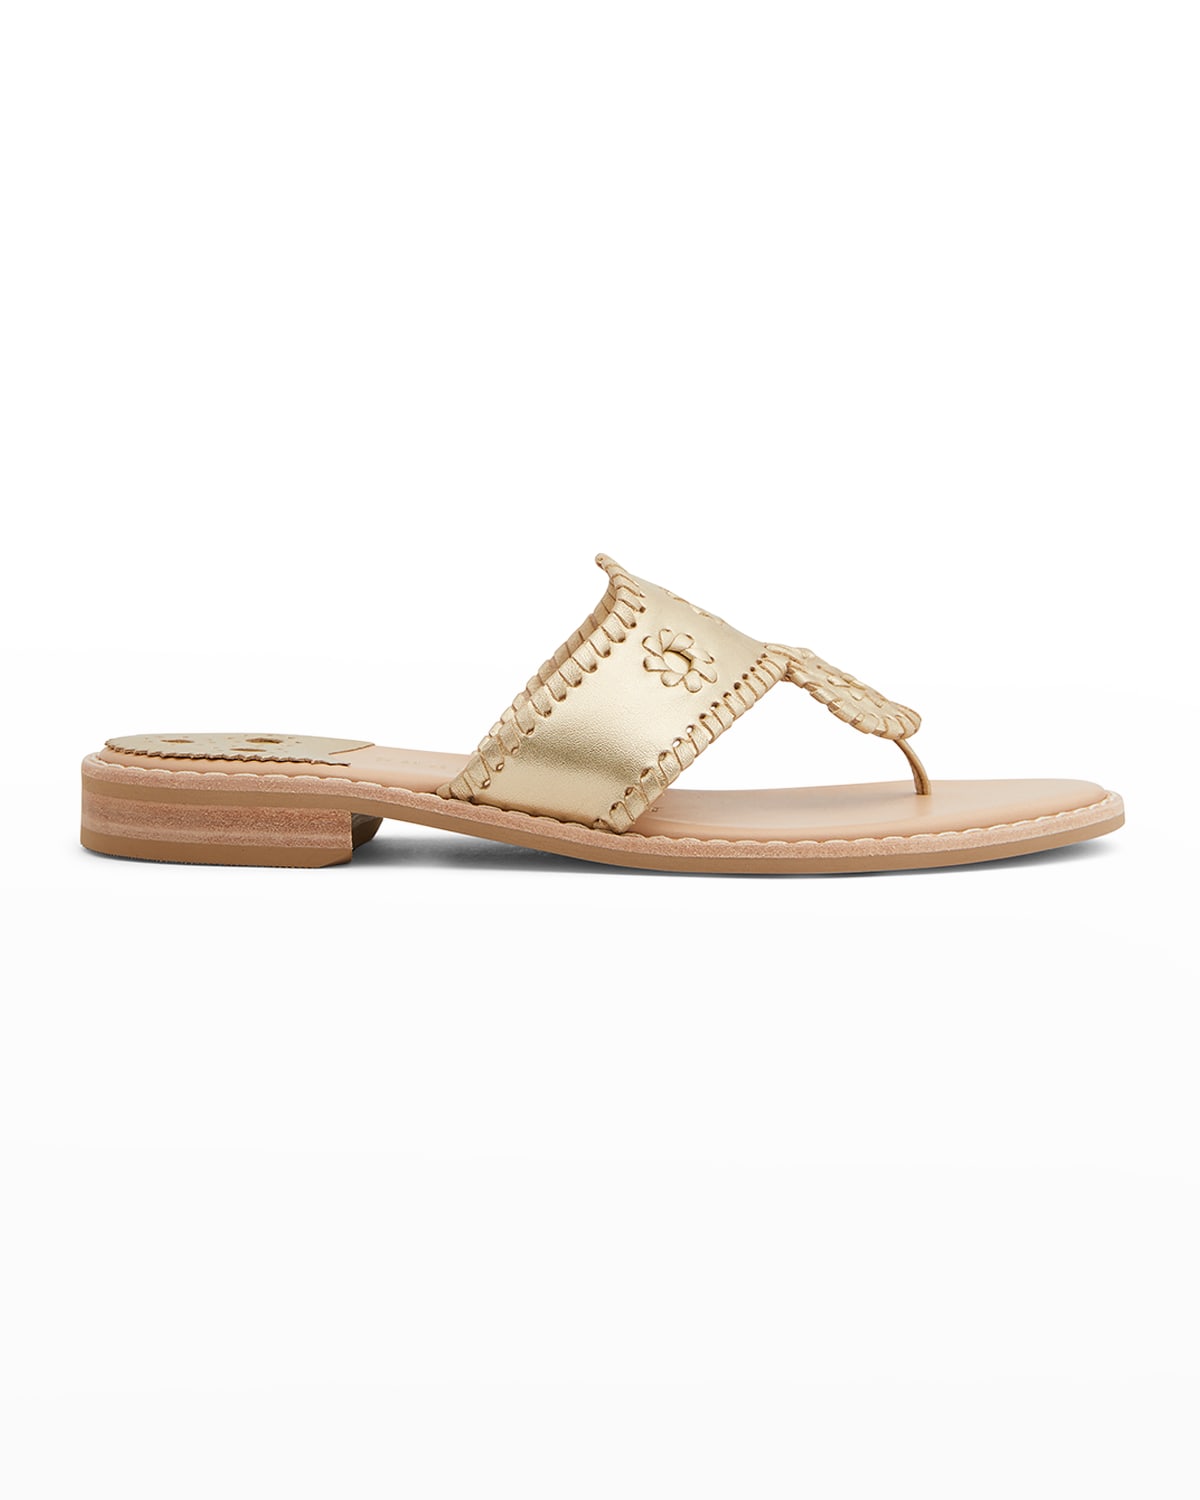 JACK ROGERS JACKS WOVEN LEATHER THONG SANDALS